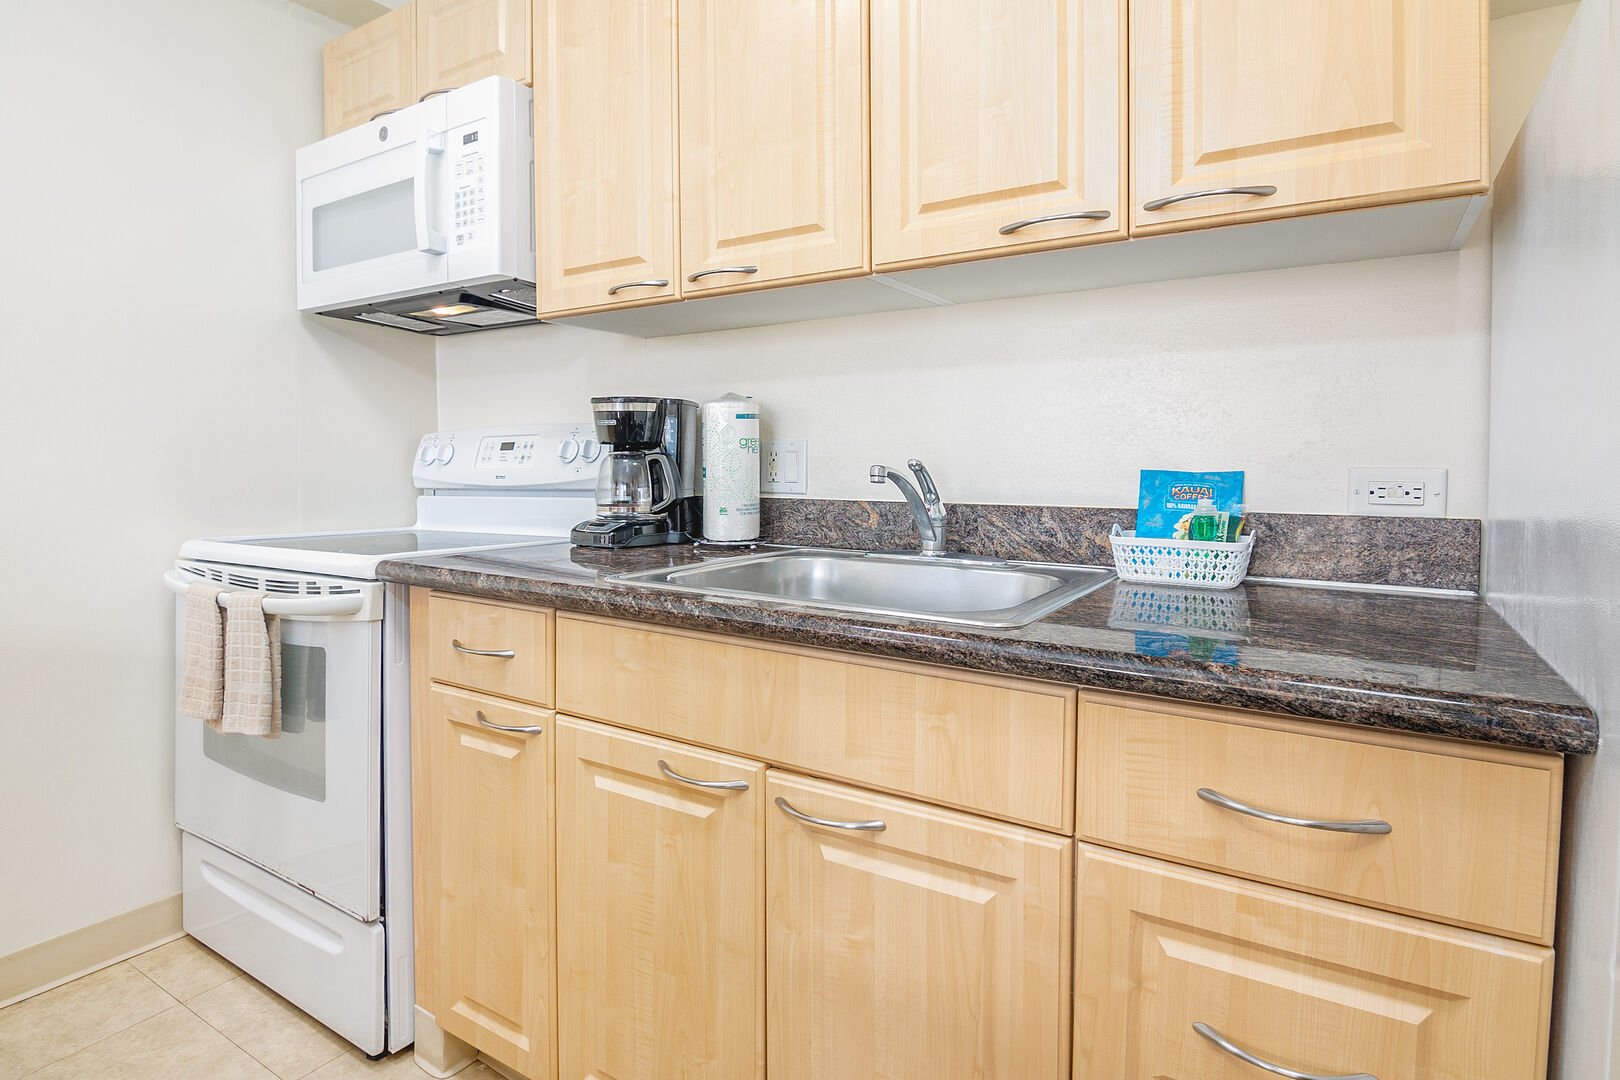 Fully equipped kitchen with full size appliances.